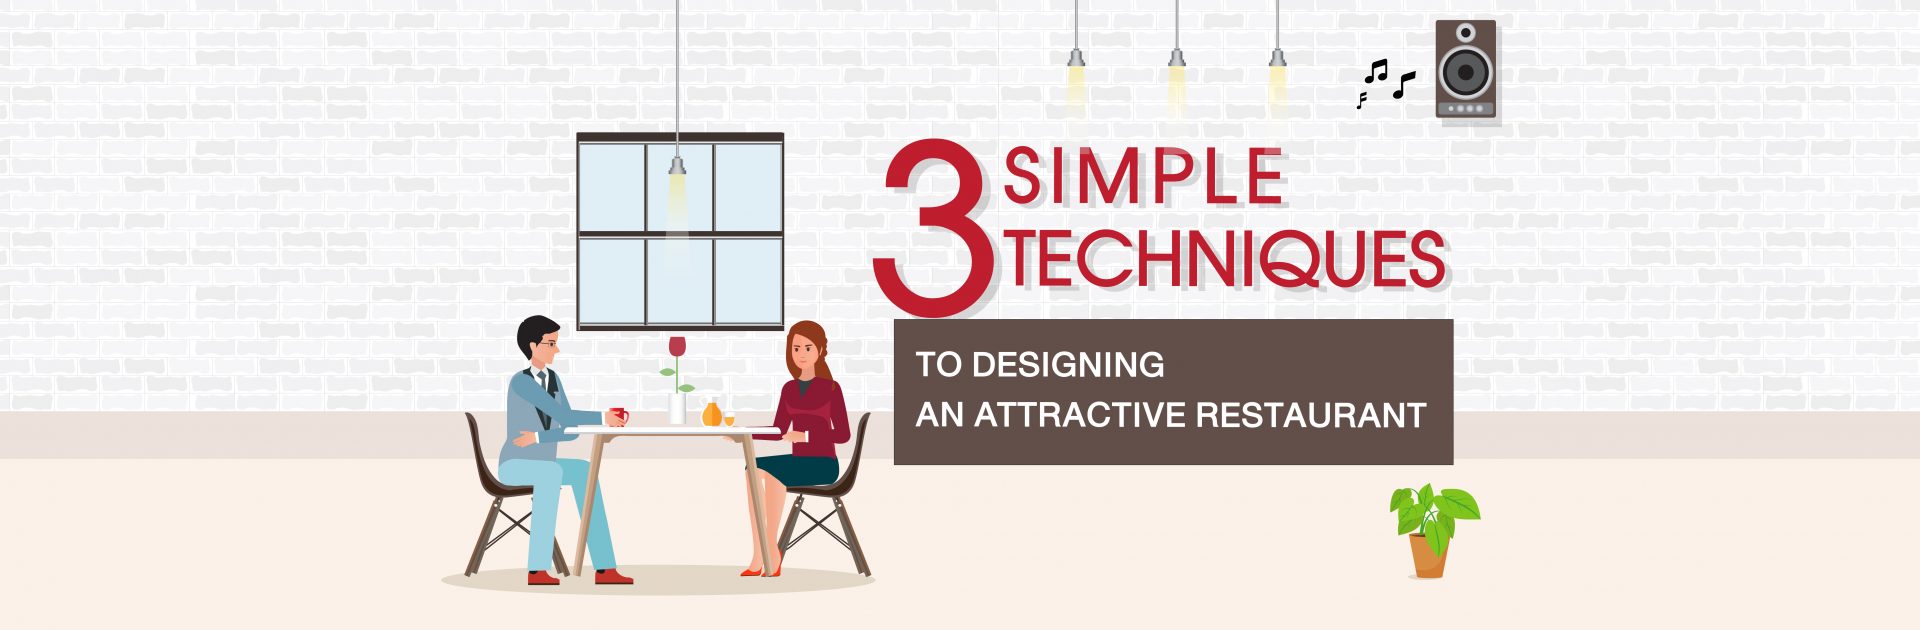 Basic steps to designing a restaurant that anyone can do